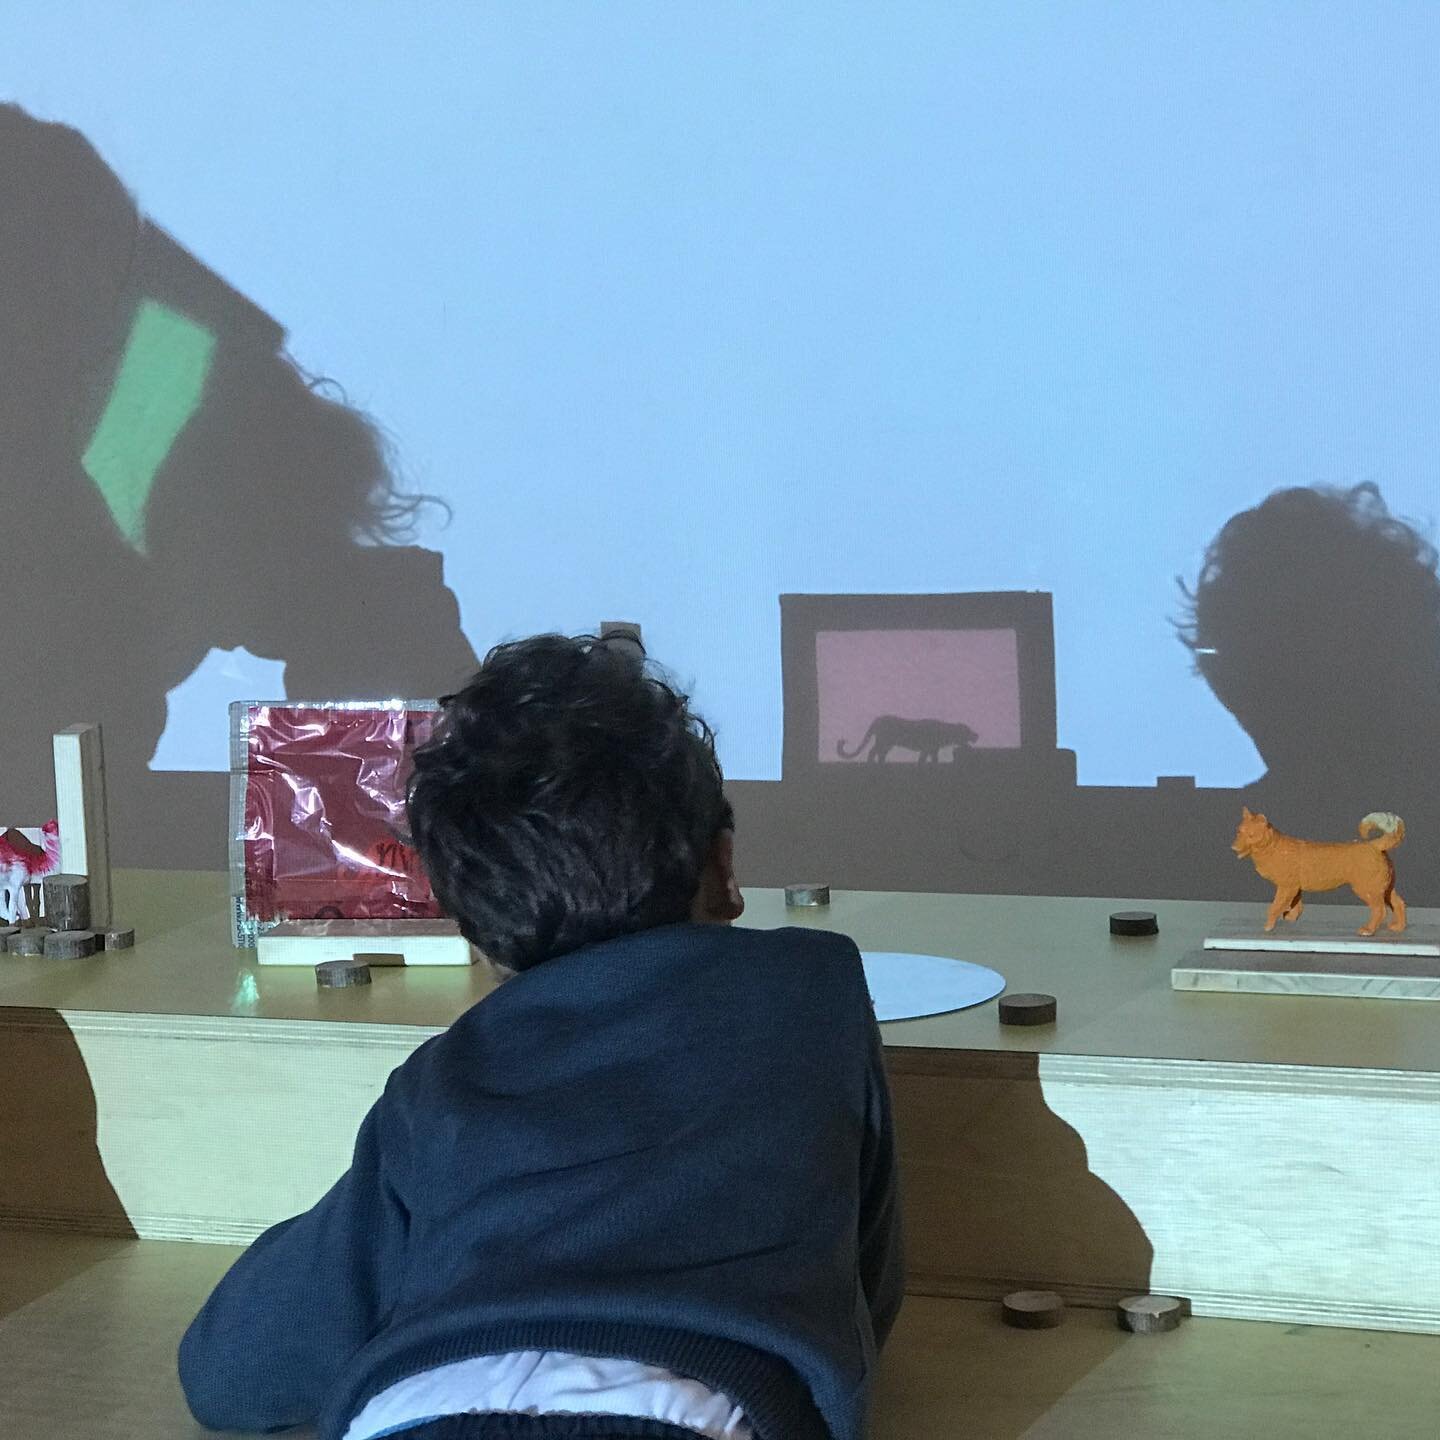 Student in activity that involves the use of light, shadows, miniatures of animals and colored transparencies to form scenarios and stories on the wall.